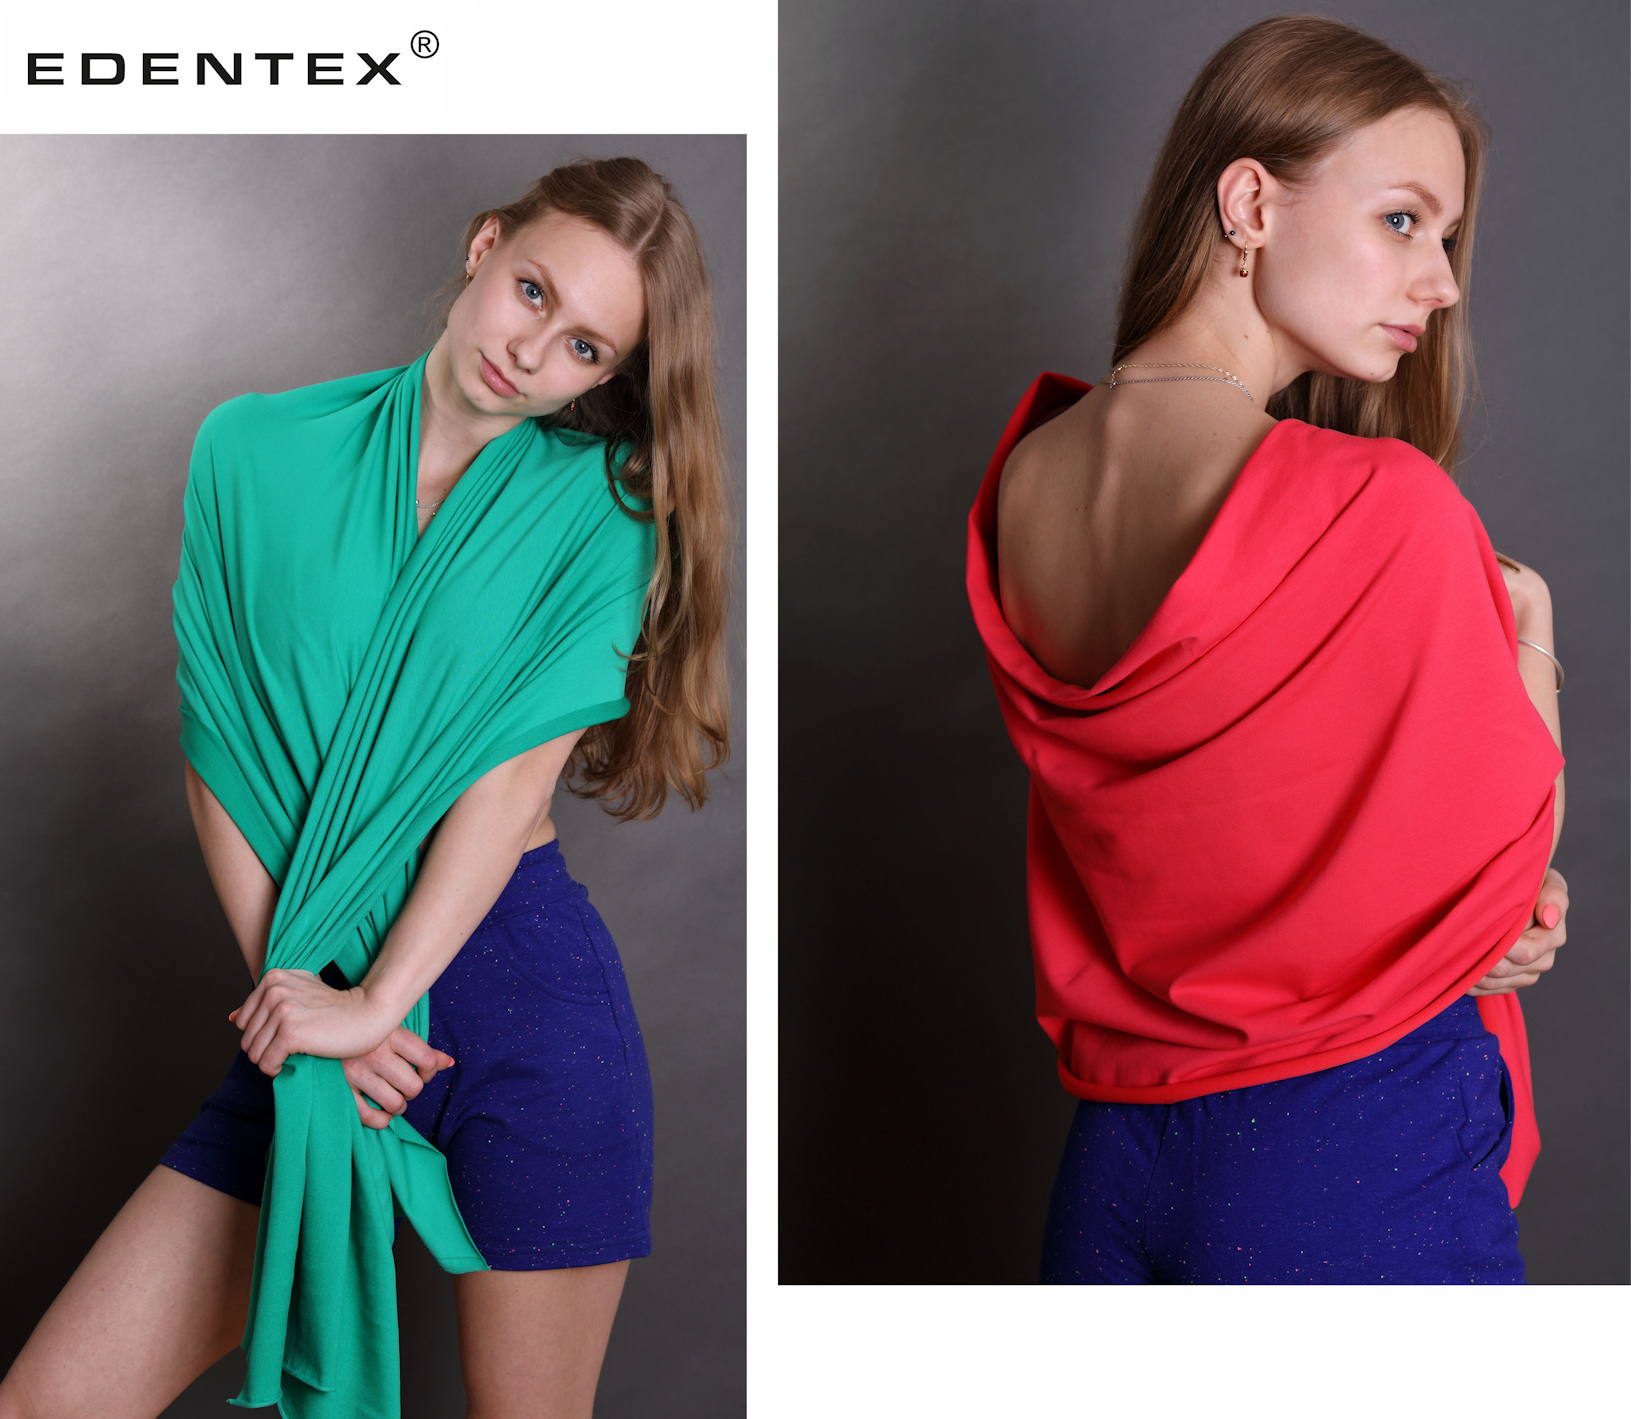 There are two reasons of EDENTEX®’s success: passion for beautiful and durable fabrics and love for cotton